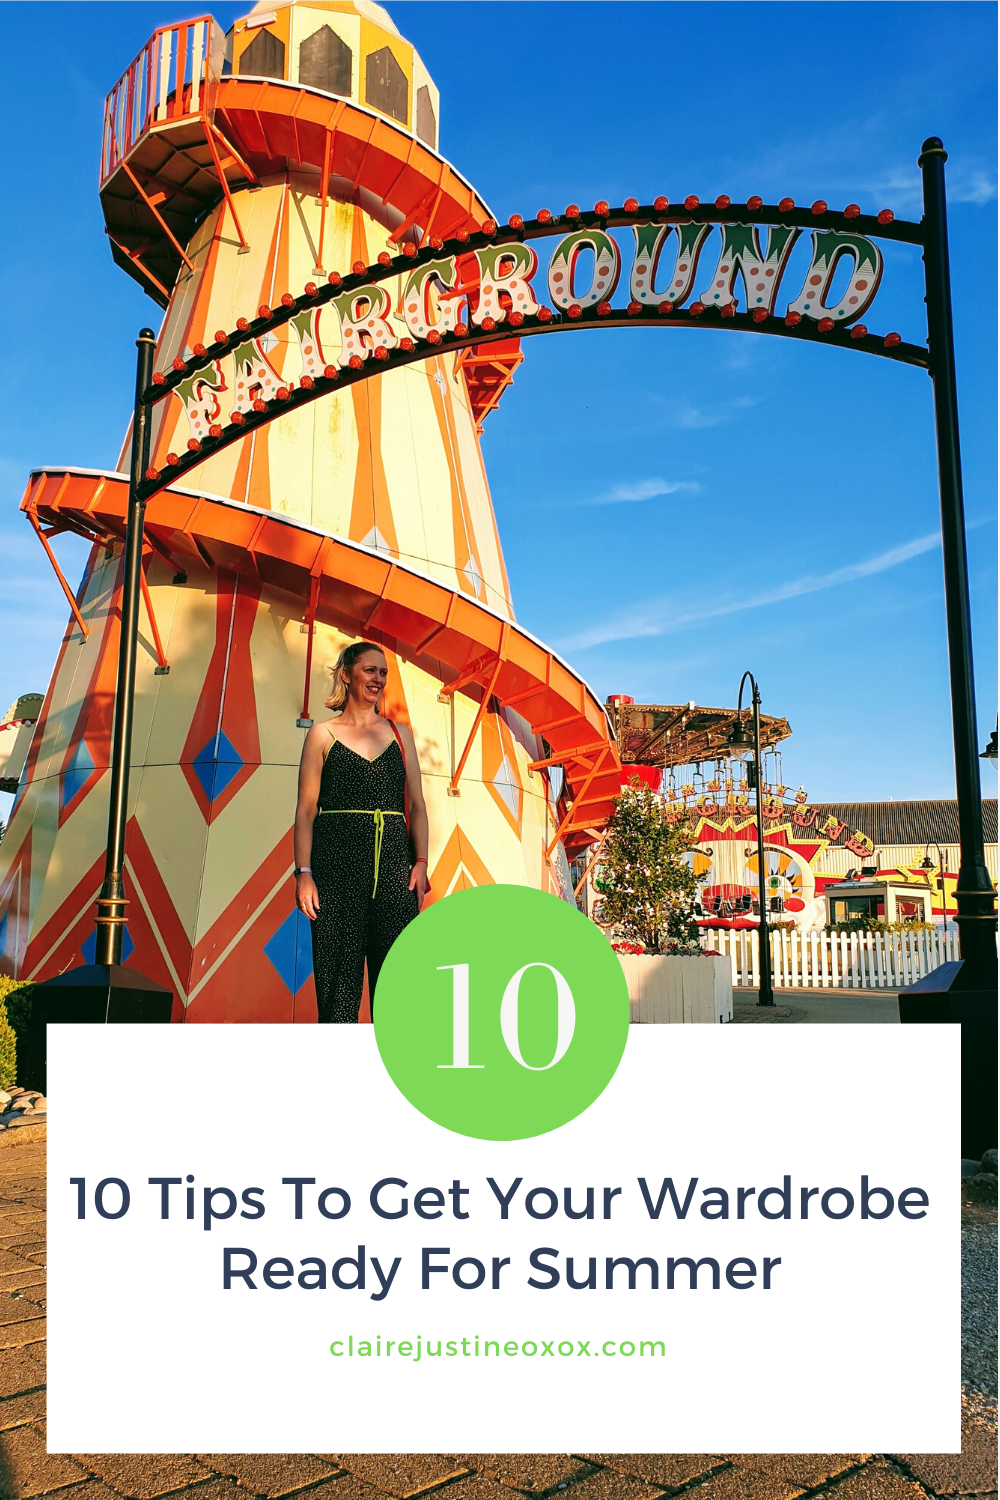 10 Tips To Get Your Wardrobe Ready For Summer